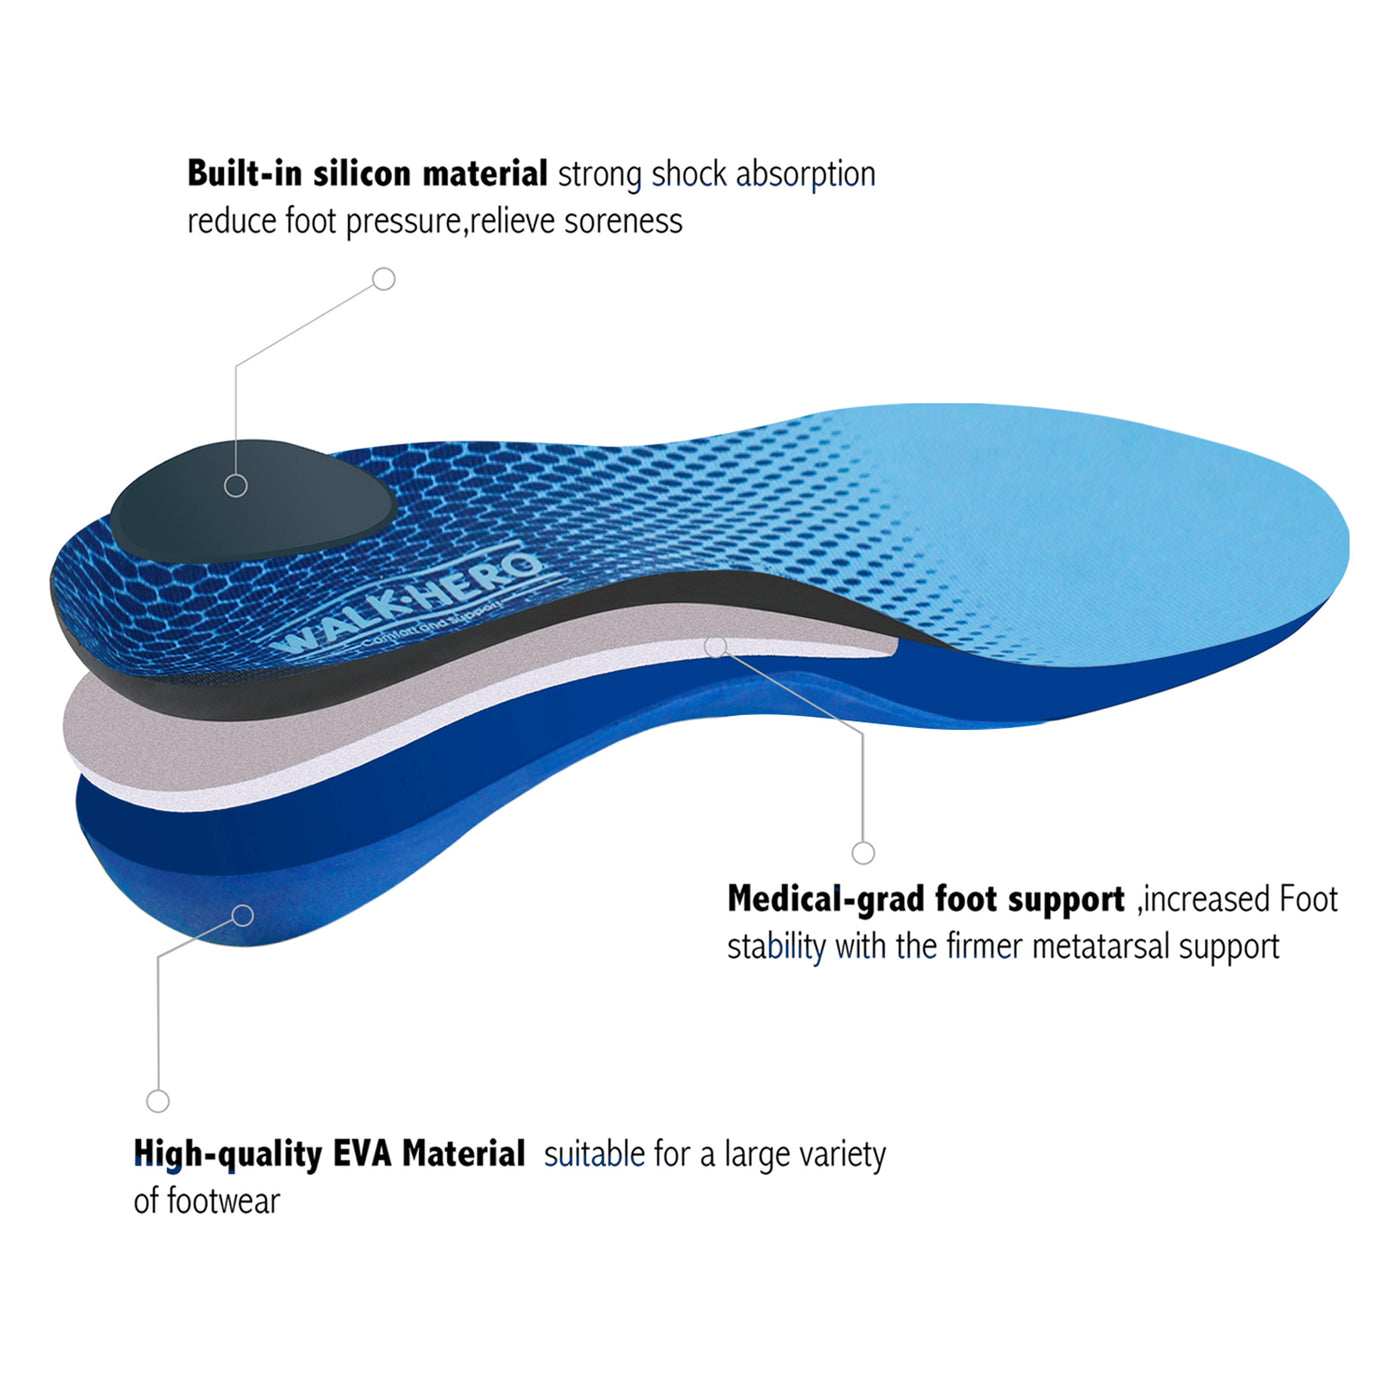 WALKHERO Men's Arch Support Orthotic Insoles New Blue